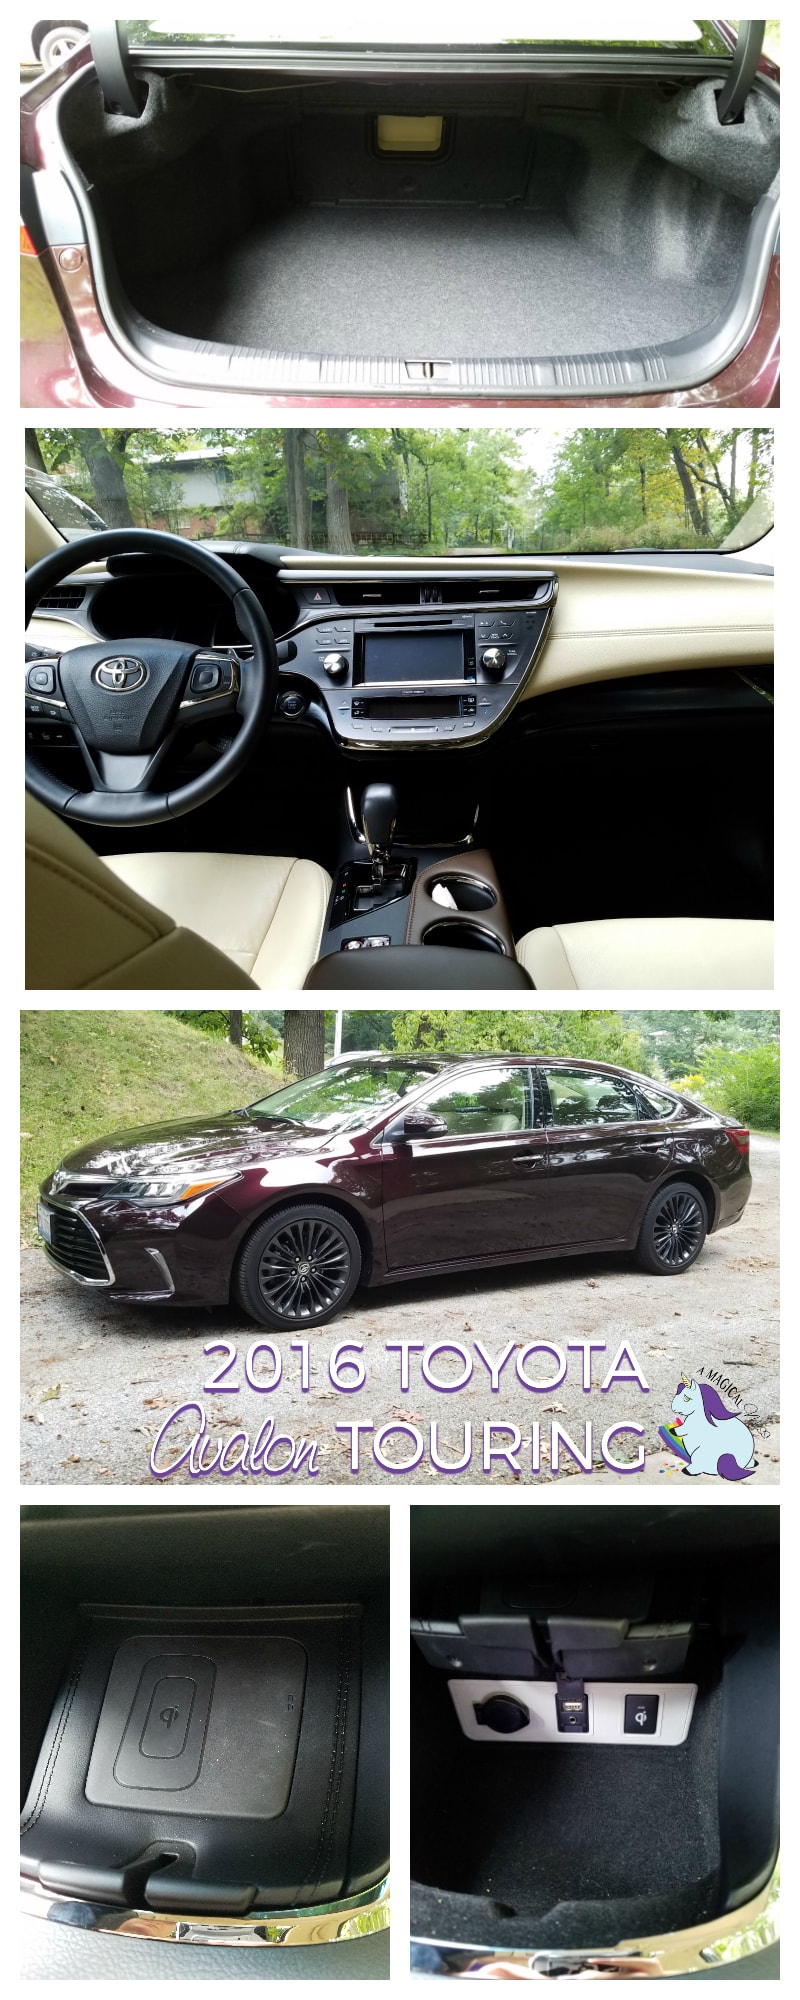 2016 Toyota Avalon Touring collage of the interior and exterior. 